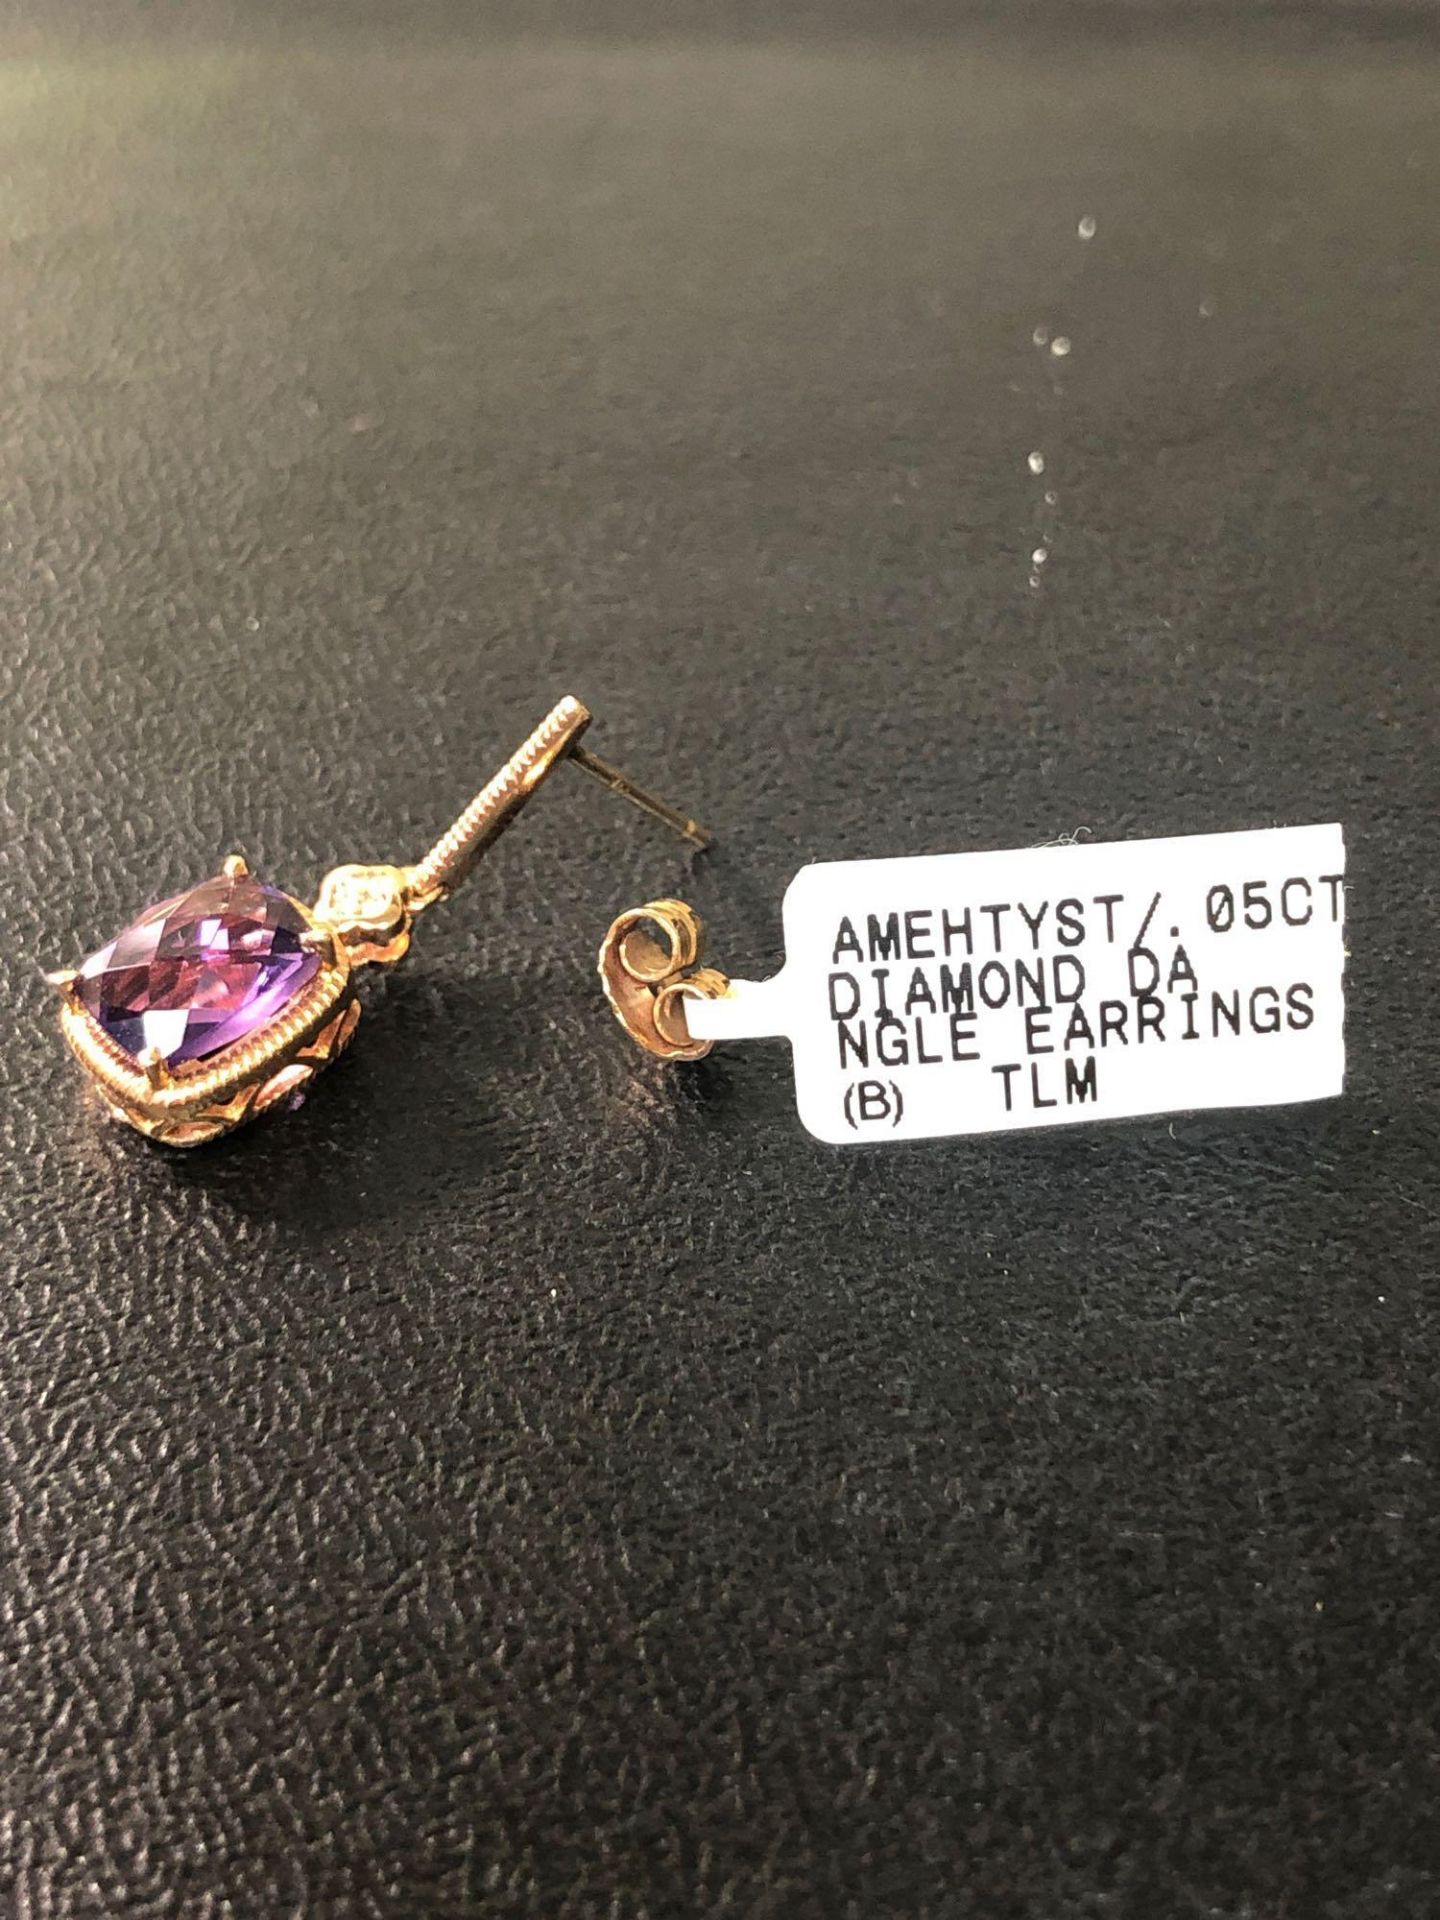 AMETHYST AND .05CT DIAMOND EARRINGS 14KT ROSE GOLD